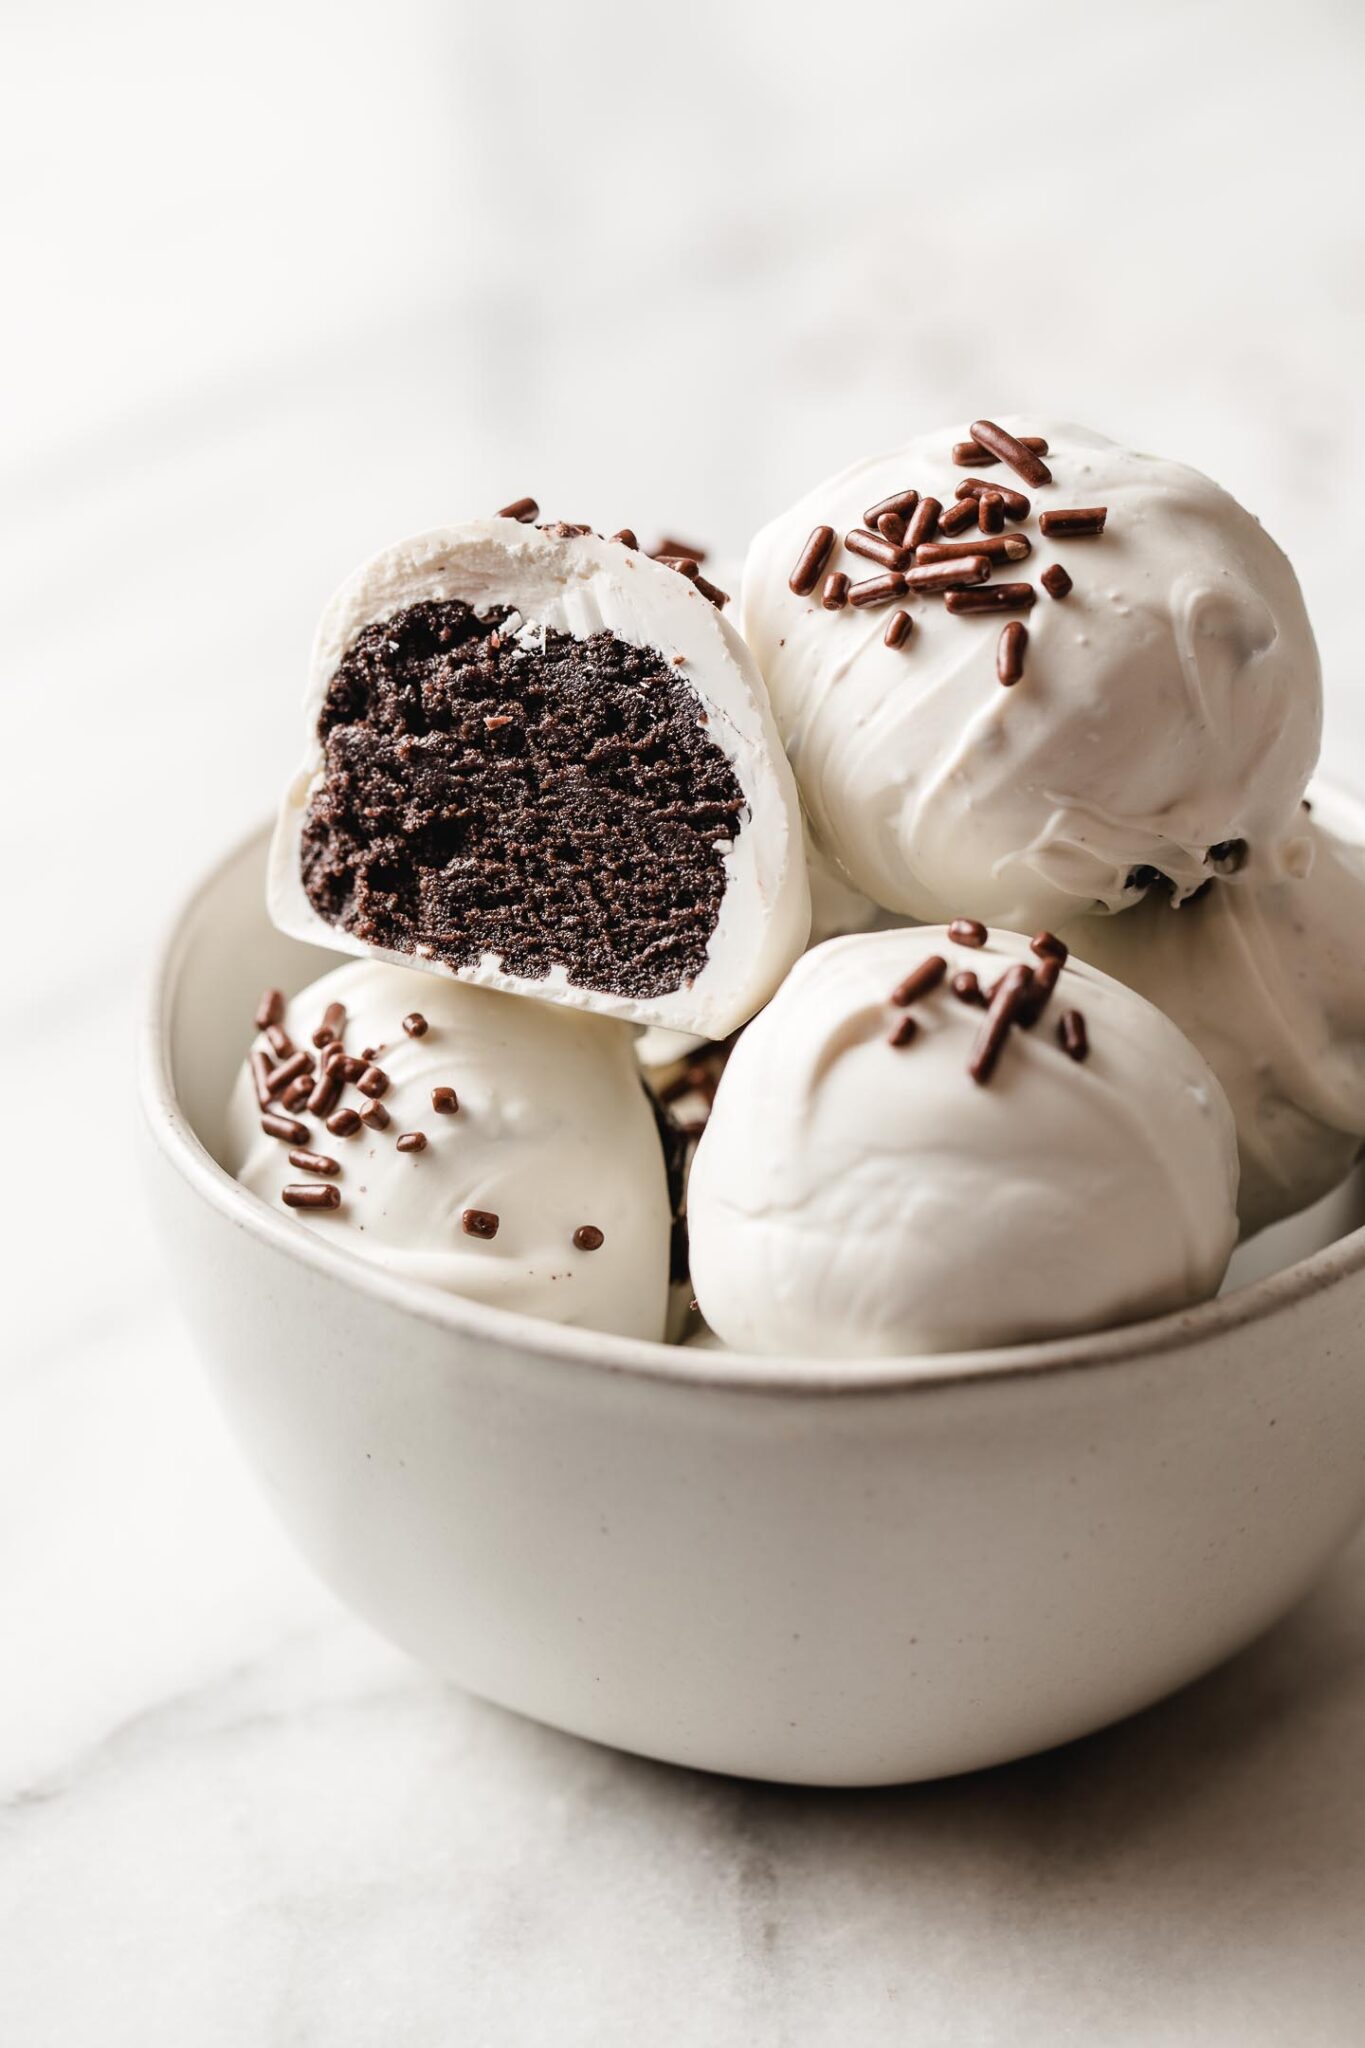 Oreo Balls Recipe (3 Ingredients) - Amy in the Kitchen